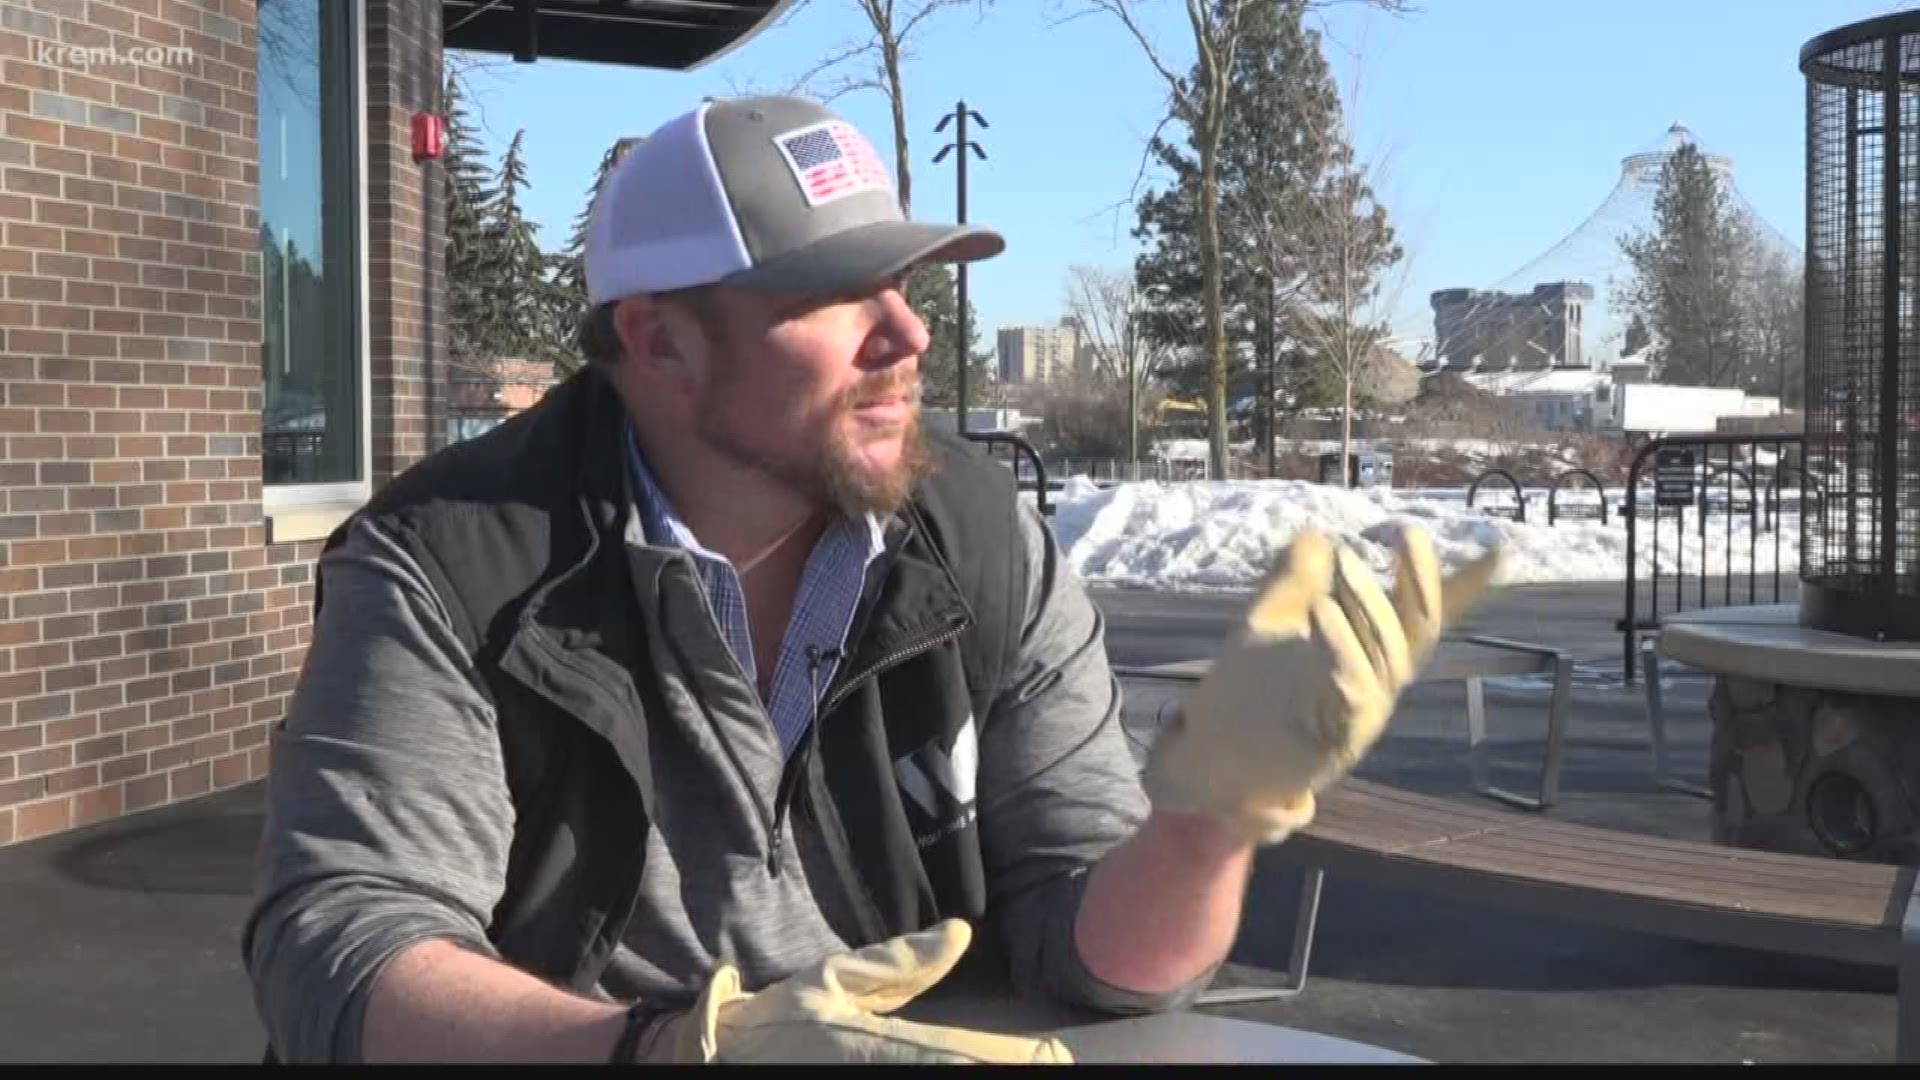 Shayna Waltower spoke with a Spokane man who spent days on the streets to get a first-hand experience of homelessness.